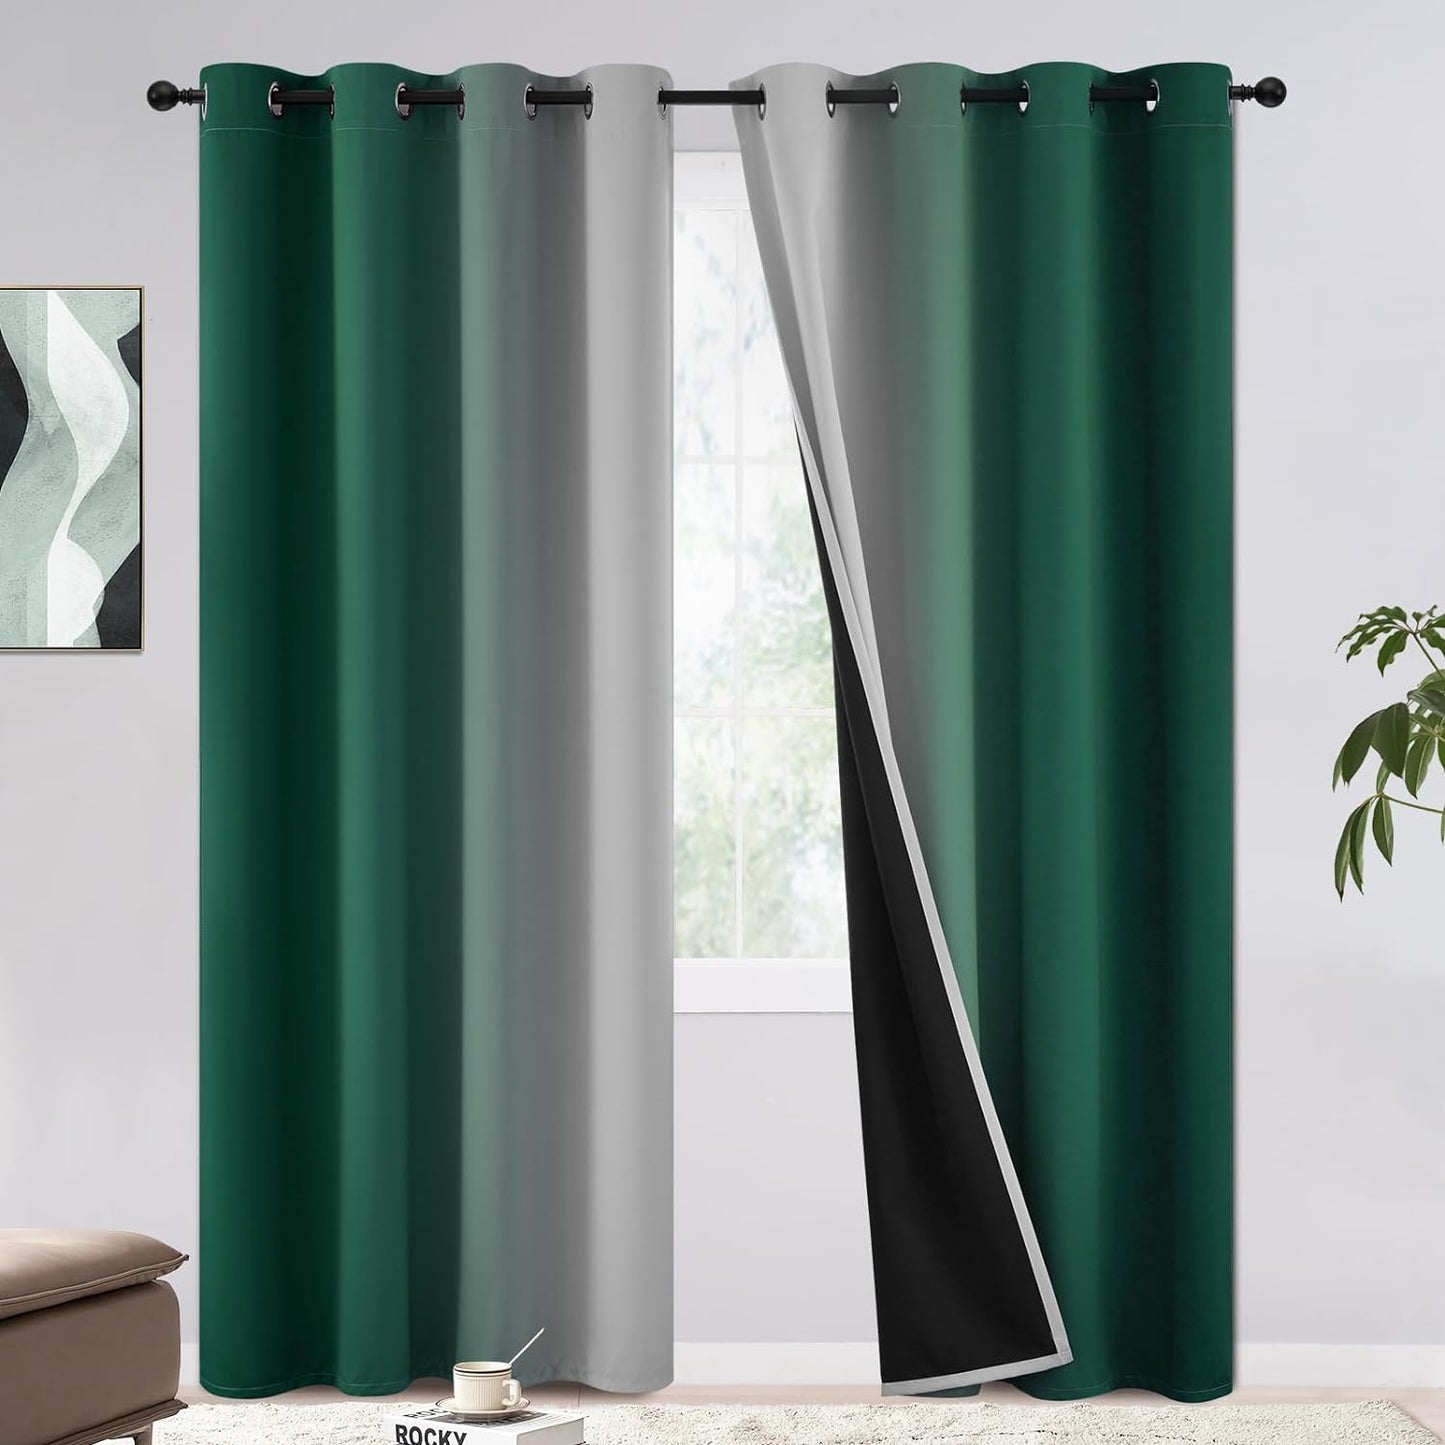 COSVIYA 100% Blackout Curtains & Drapes Ombre Purple Curtains 63 Inch Length 2 Panels,Full Room Darkening Grommet Gradient Insulated Thermal Window Curtains for Bedroom/Living Room,52X63 Inches  COSVIYA Green To Greyish White 52W X 84L 